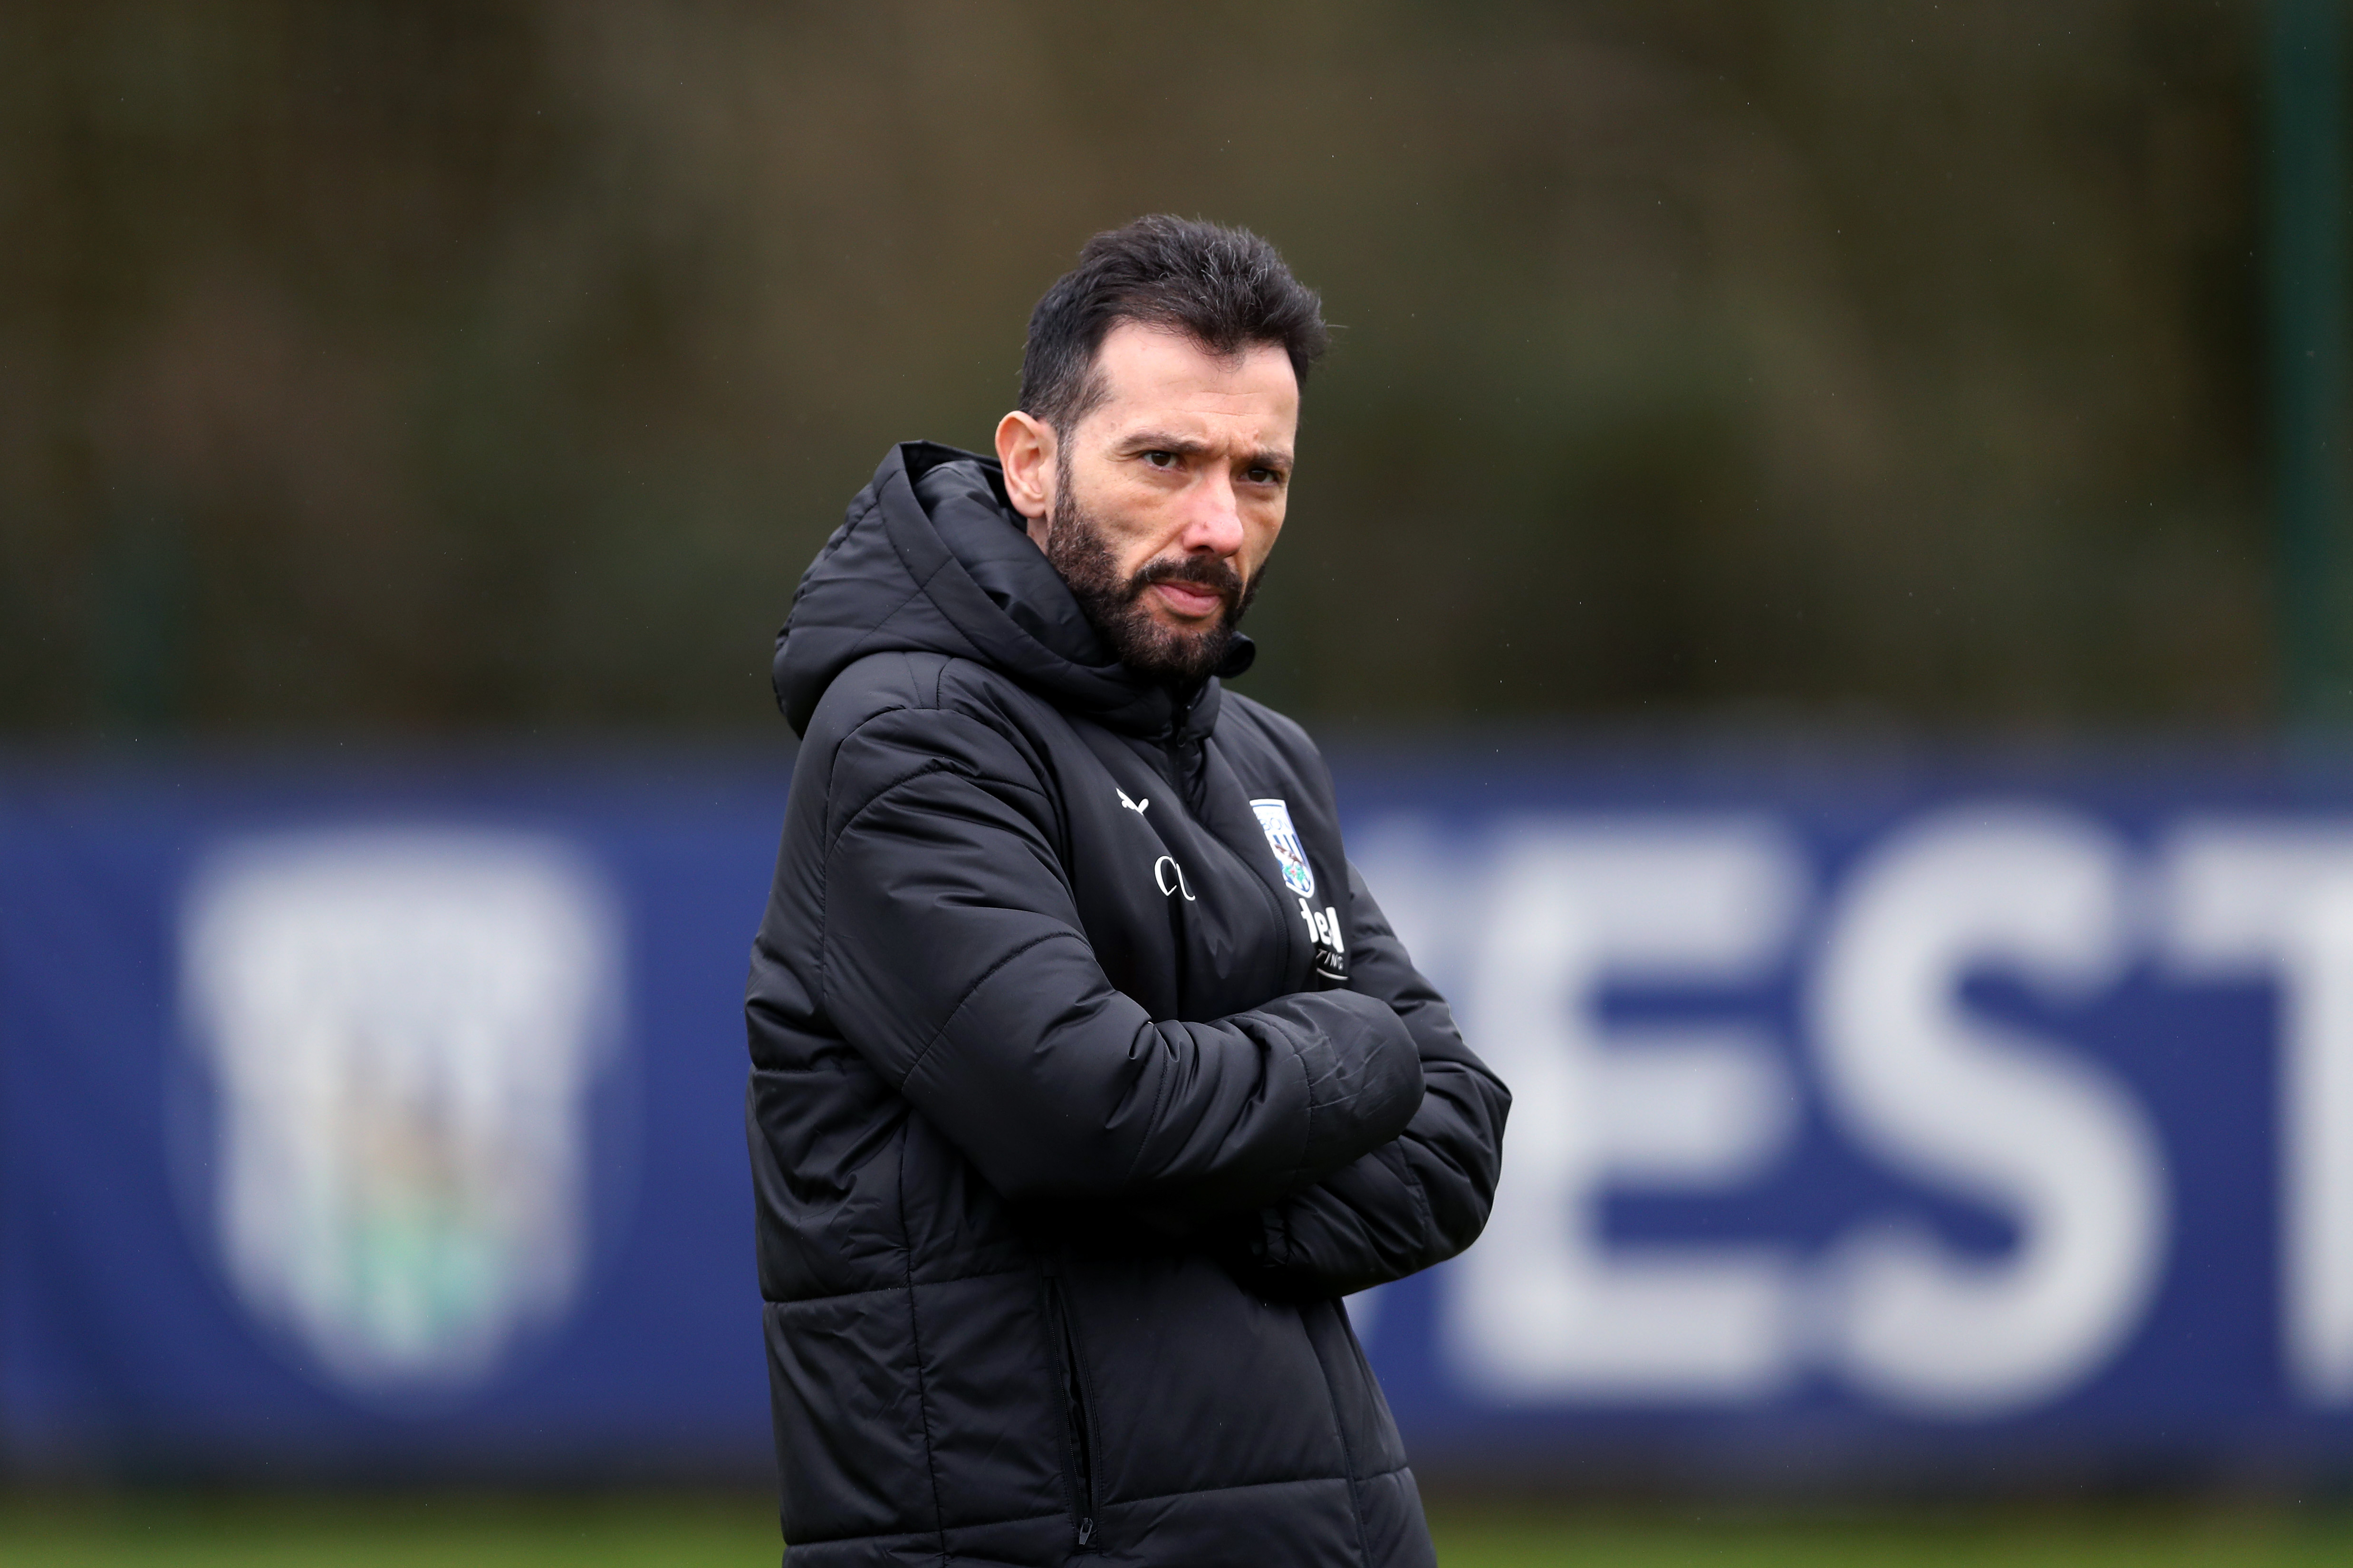 Carlos Corberán looking at the camera while wearing a black Albion coat in the middle of a training session